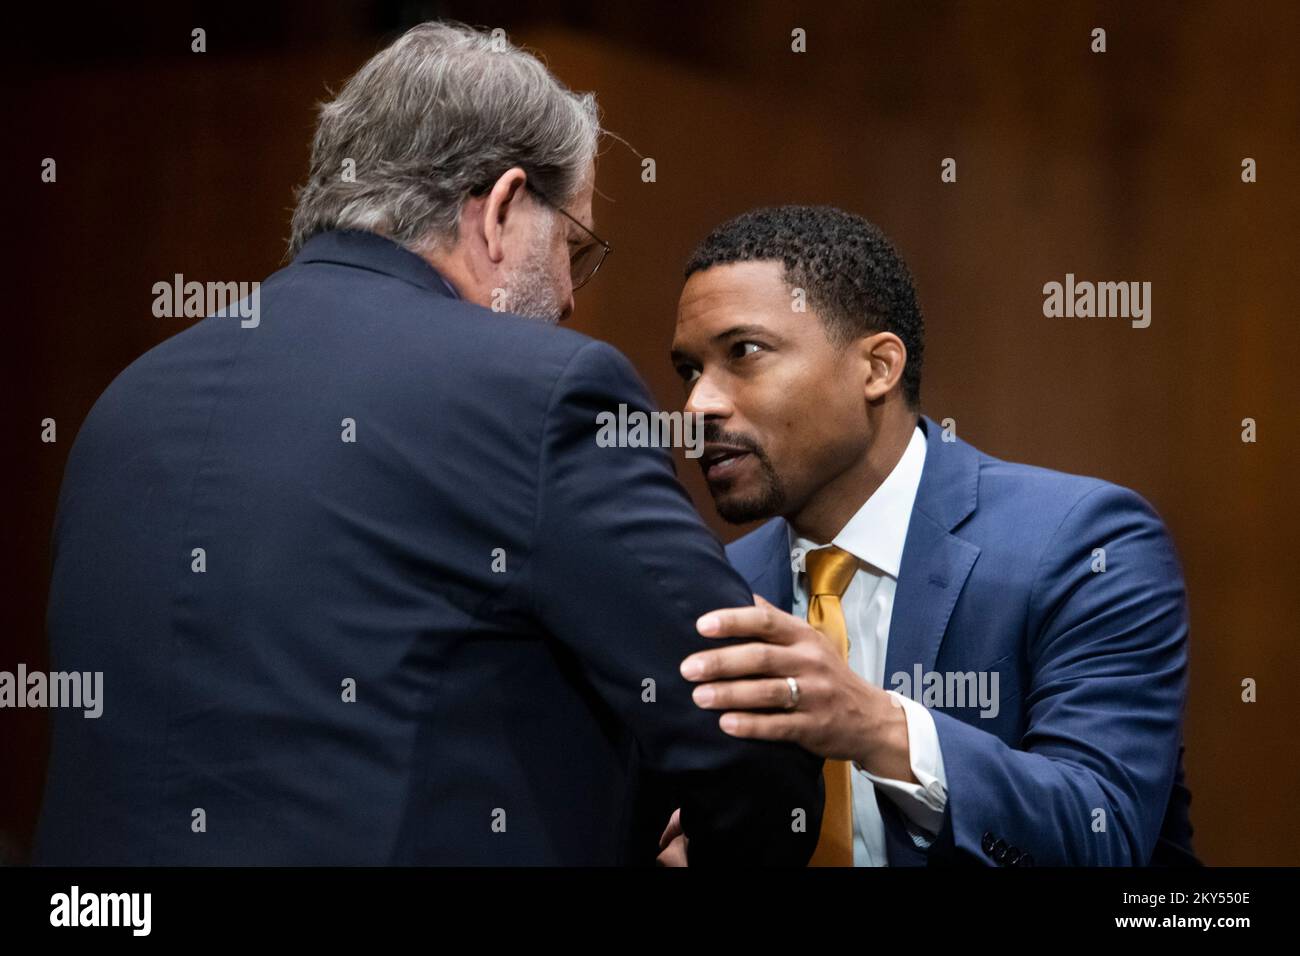 Washington, United States Of America. 30th Nov, 2022. United States Senator Gary Peters (Democrat of Michigan), left, gets a hug after offering remarks to support Jonathan James Canada Grey, right, during a Senate Committee on the Judiciary hearing for his nomination to be United States District Judge for the Eastern District of Michigan, in the Dirksen Senate Office Building in Washington, DC, Wednesday, November 30, 2022. Credit: Rod Lamkey/CNP/Sipa USA Credit: Sipa USA/Alamy Live News Stock Photo